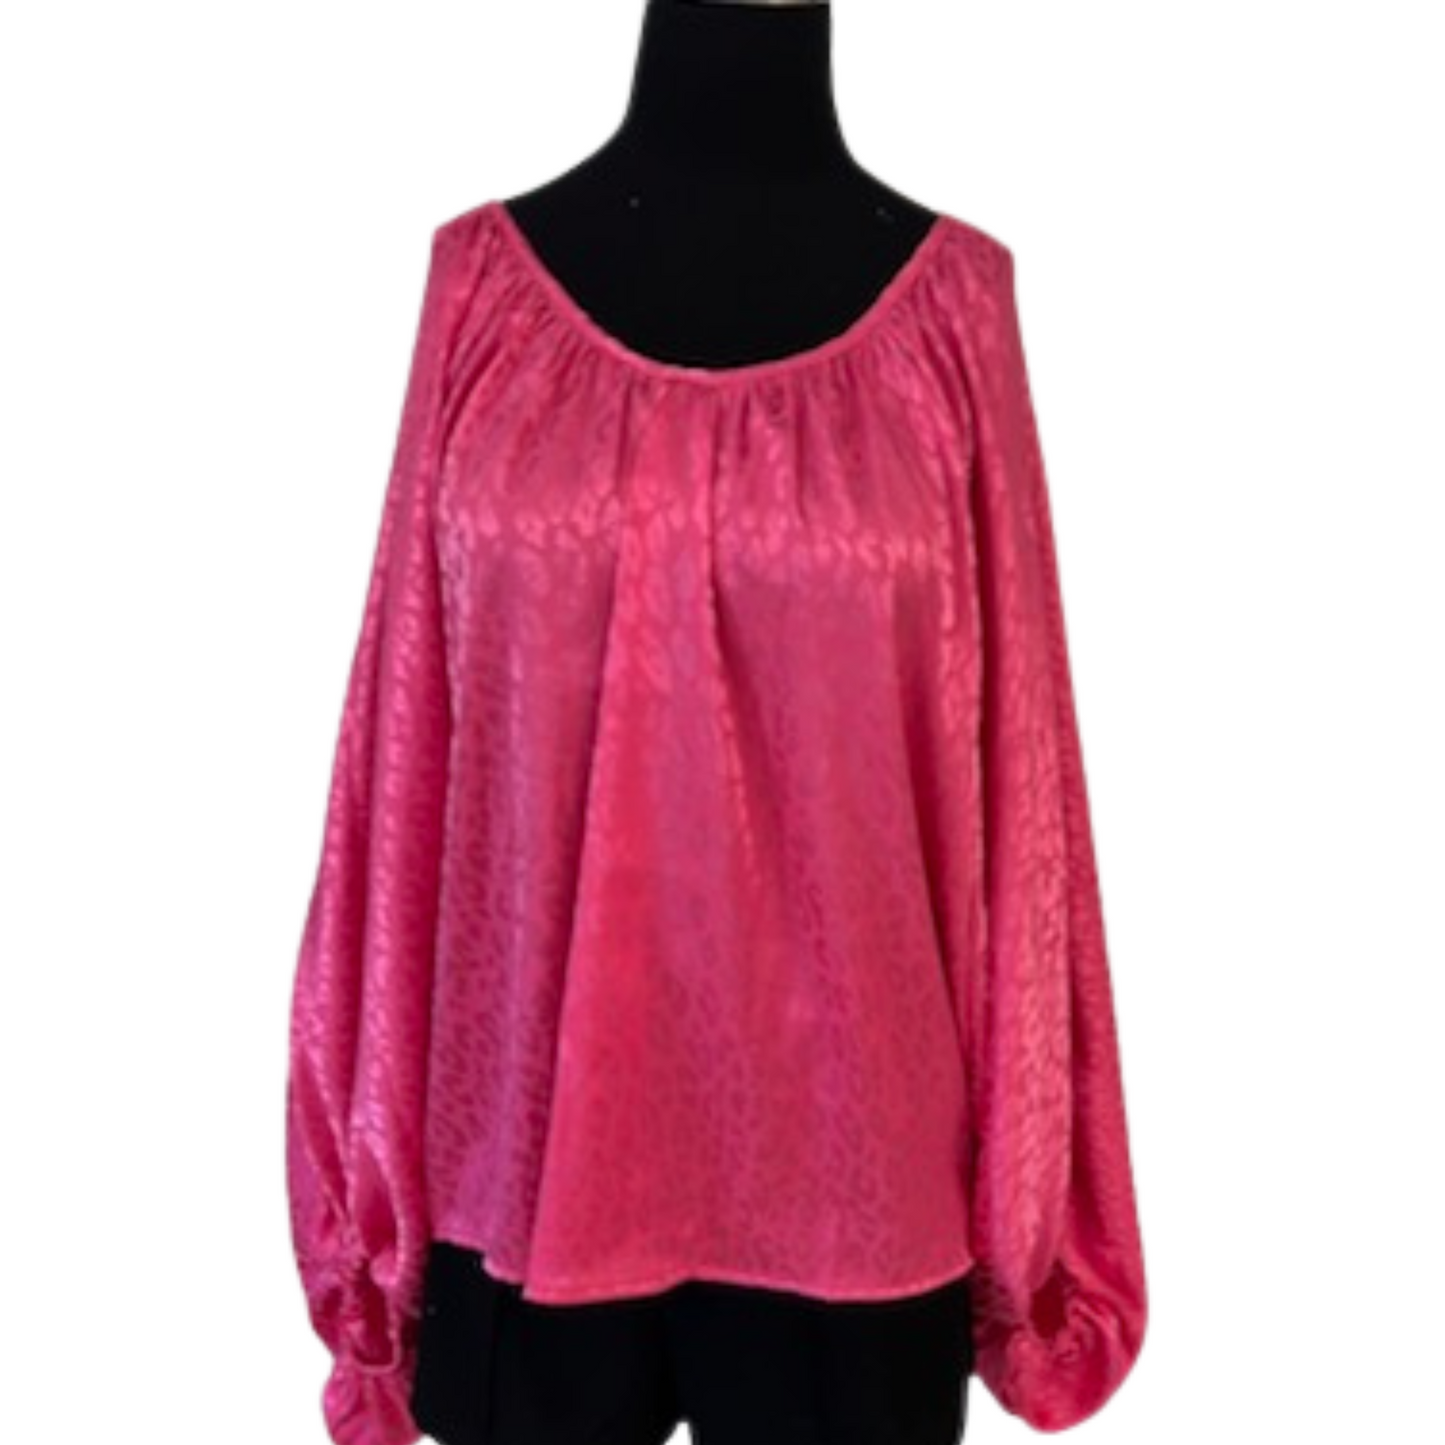 This Leopard Print Tie Back Top is the perfect way to make a statement. Available in regular and plus sizes, the hot pink, long-sleeved top features a sleek leopard print. With a professional, sophisticated look, you can wear it day or night.